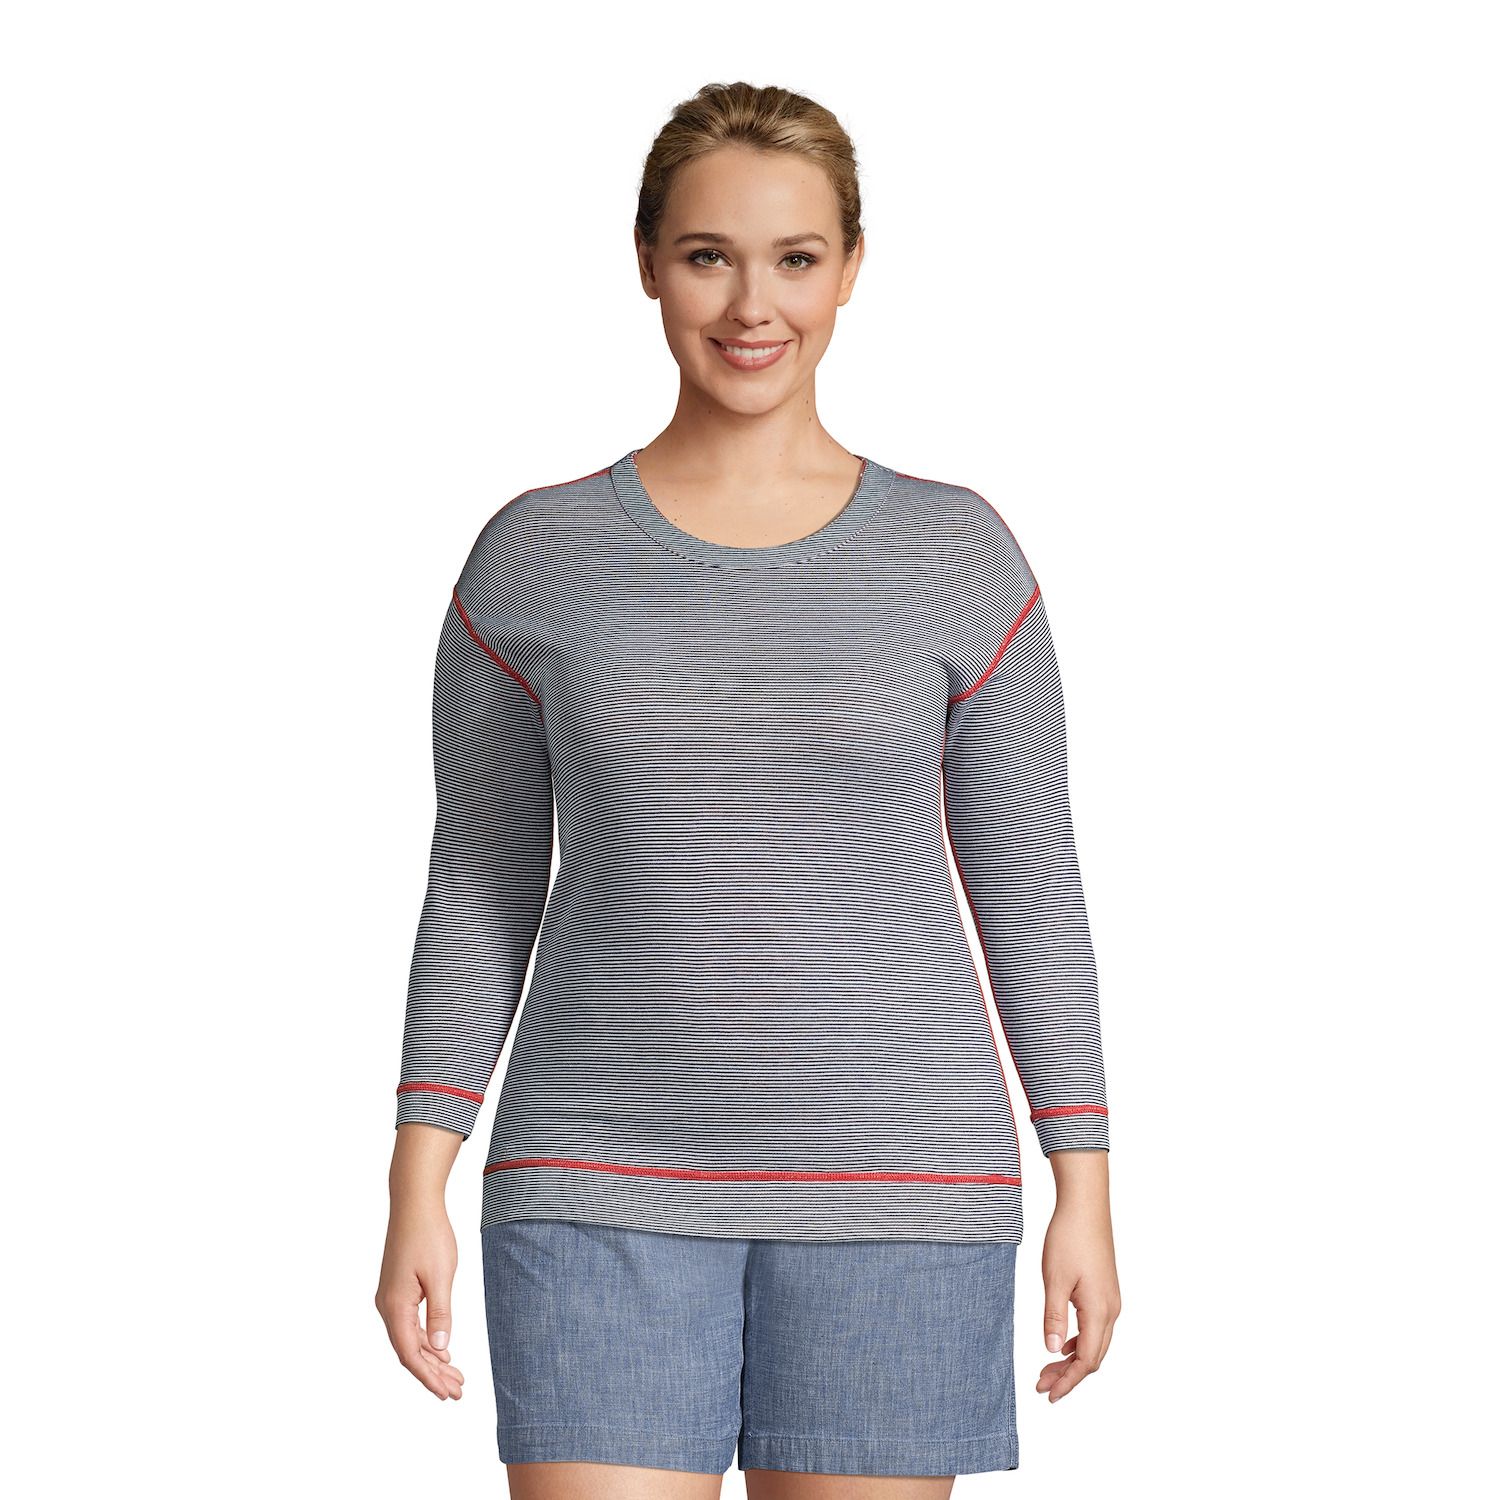 Image for Lands' End Women's Reversible Striped 3/4-Sleeve Top at Kohl's.